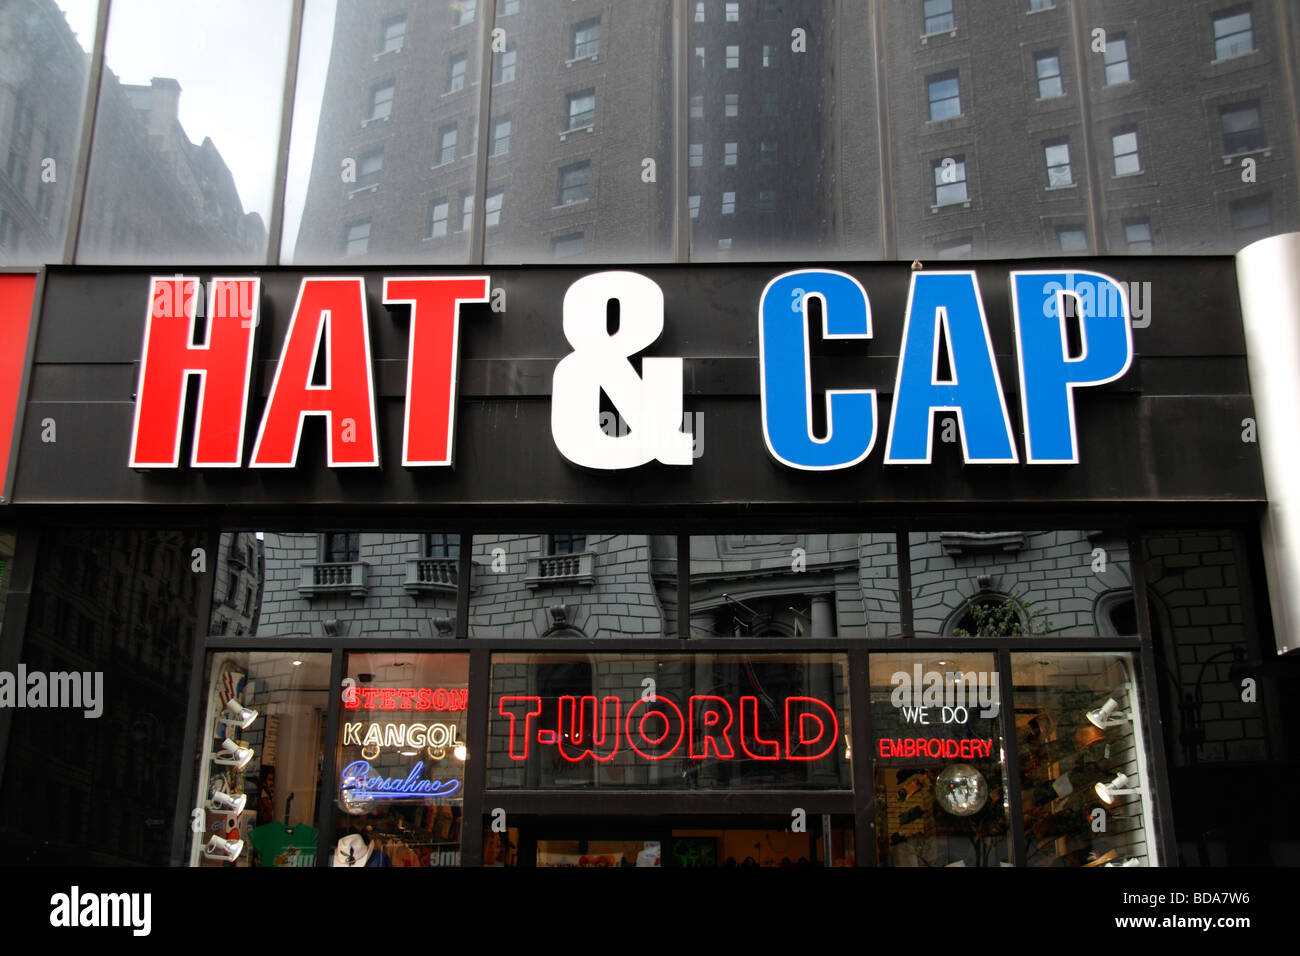 The store front of the Hat & Cap shop on Broadway, New York Stock Photo -  Alamy